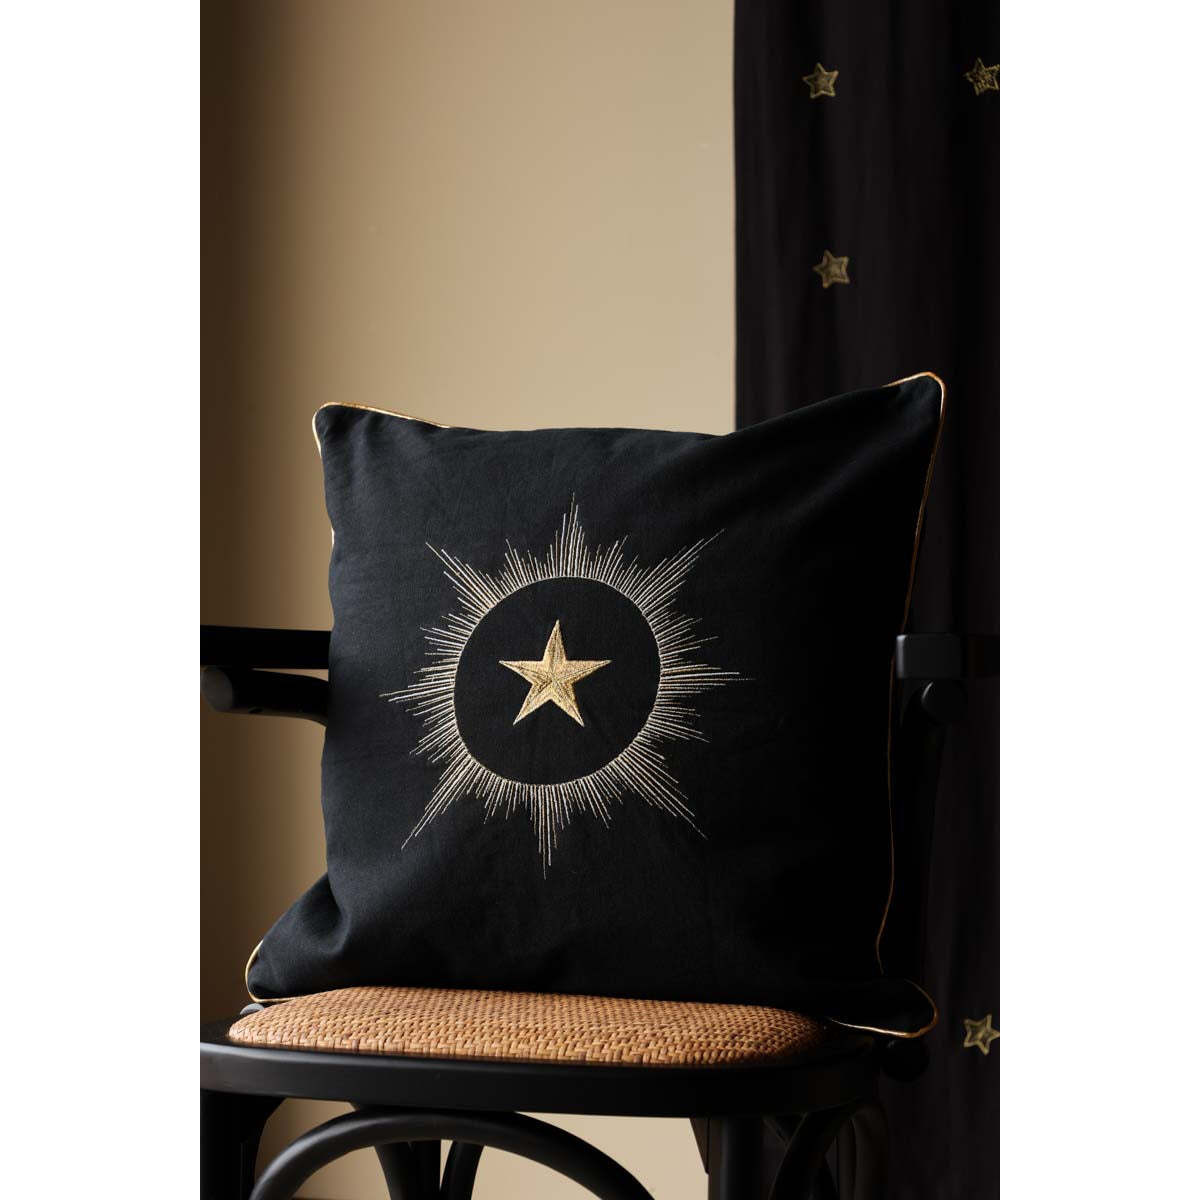 Black Star Embroidered Cushion - image 1